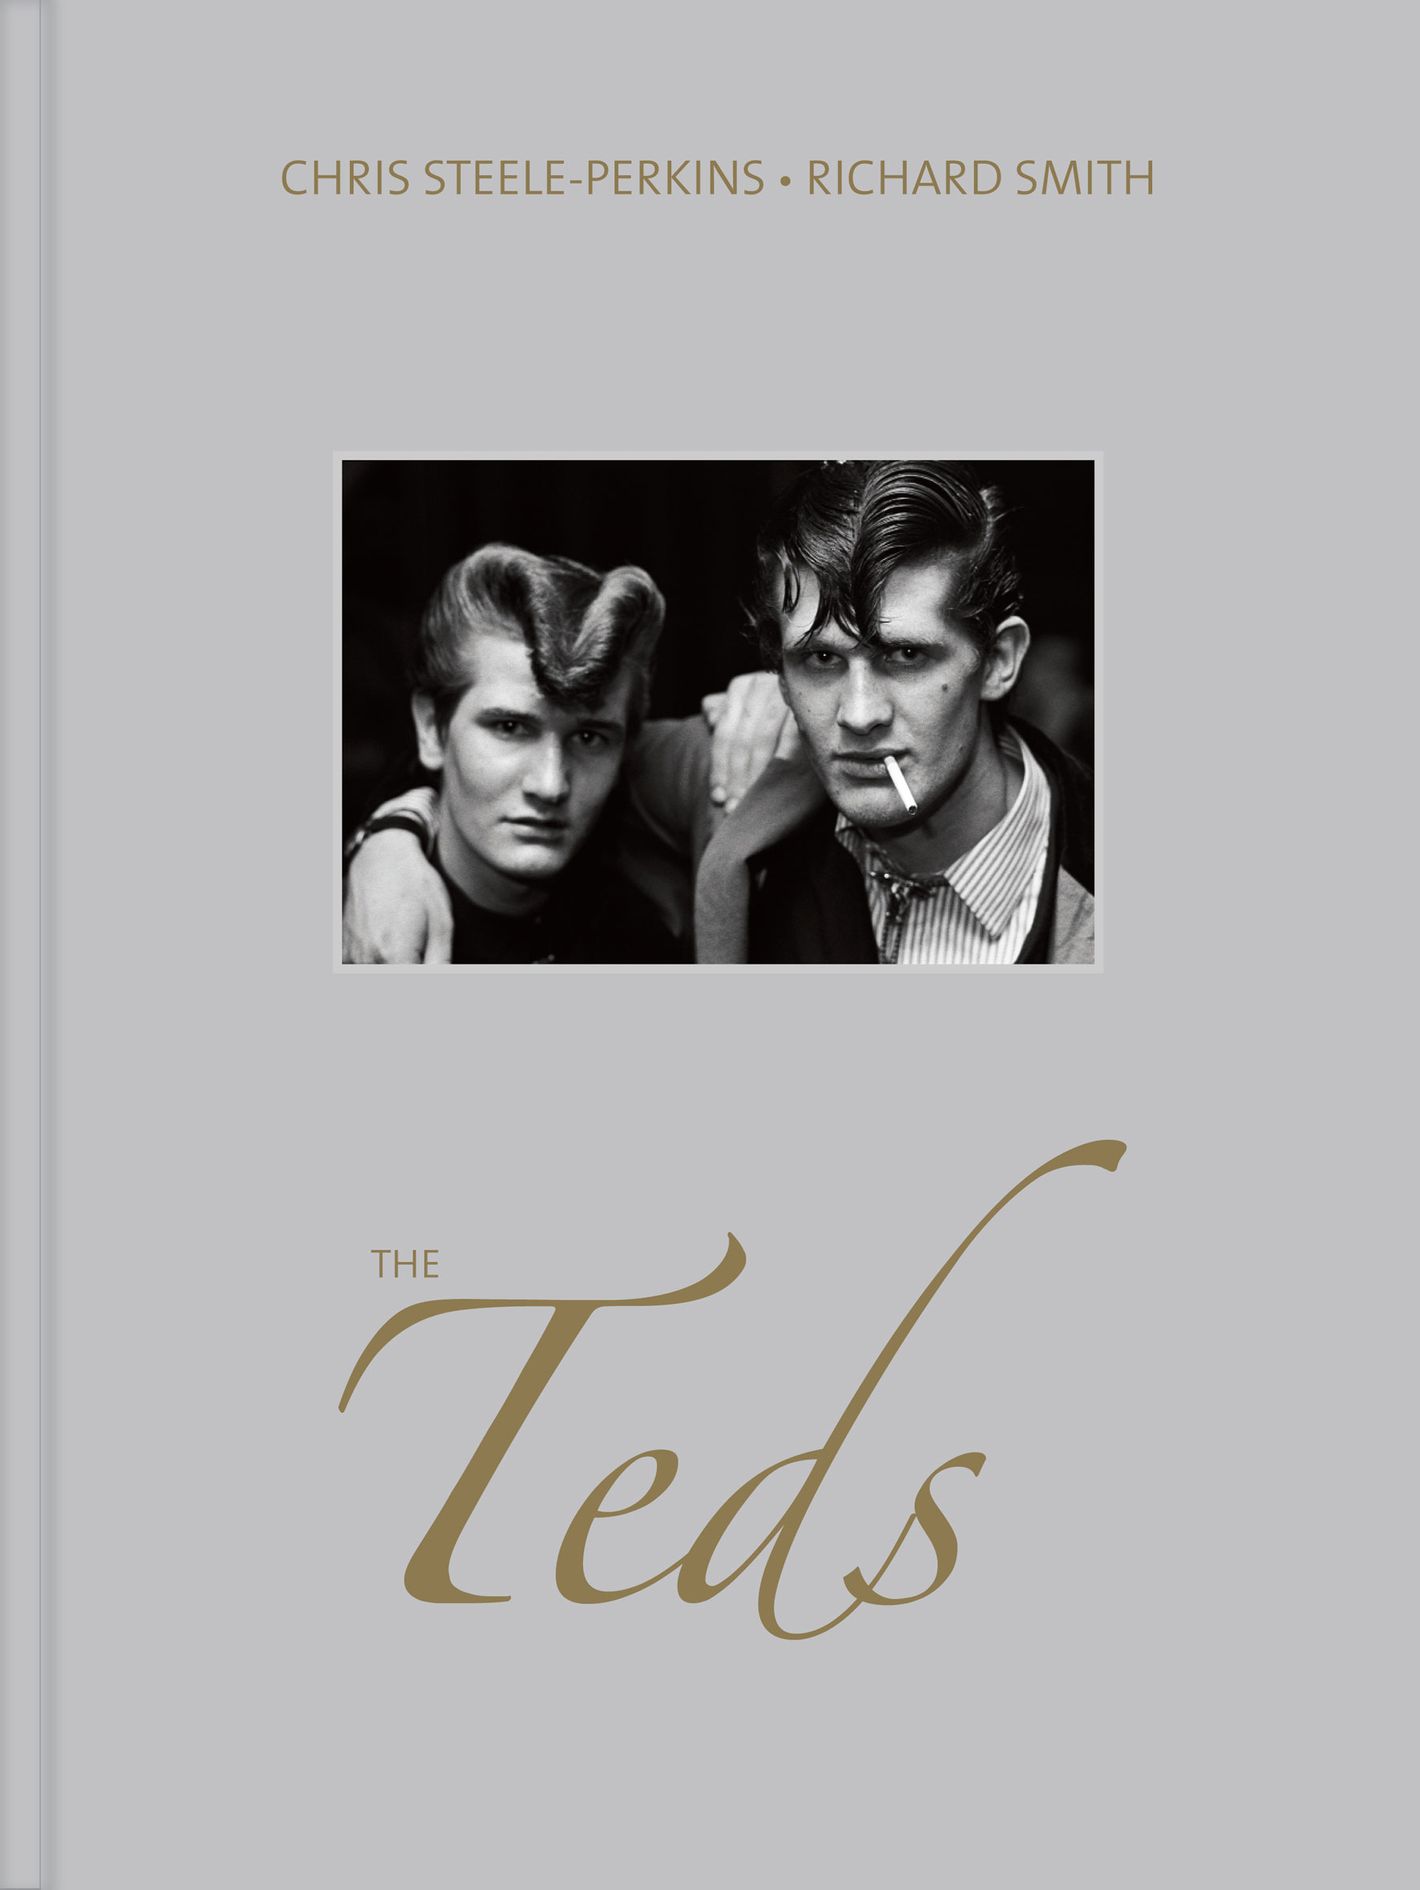 Photos of The Teds London Exhibit by Chris Steele-Perkins